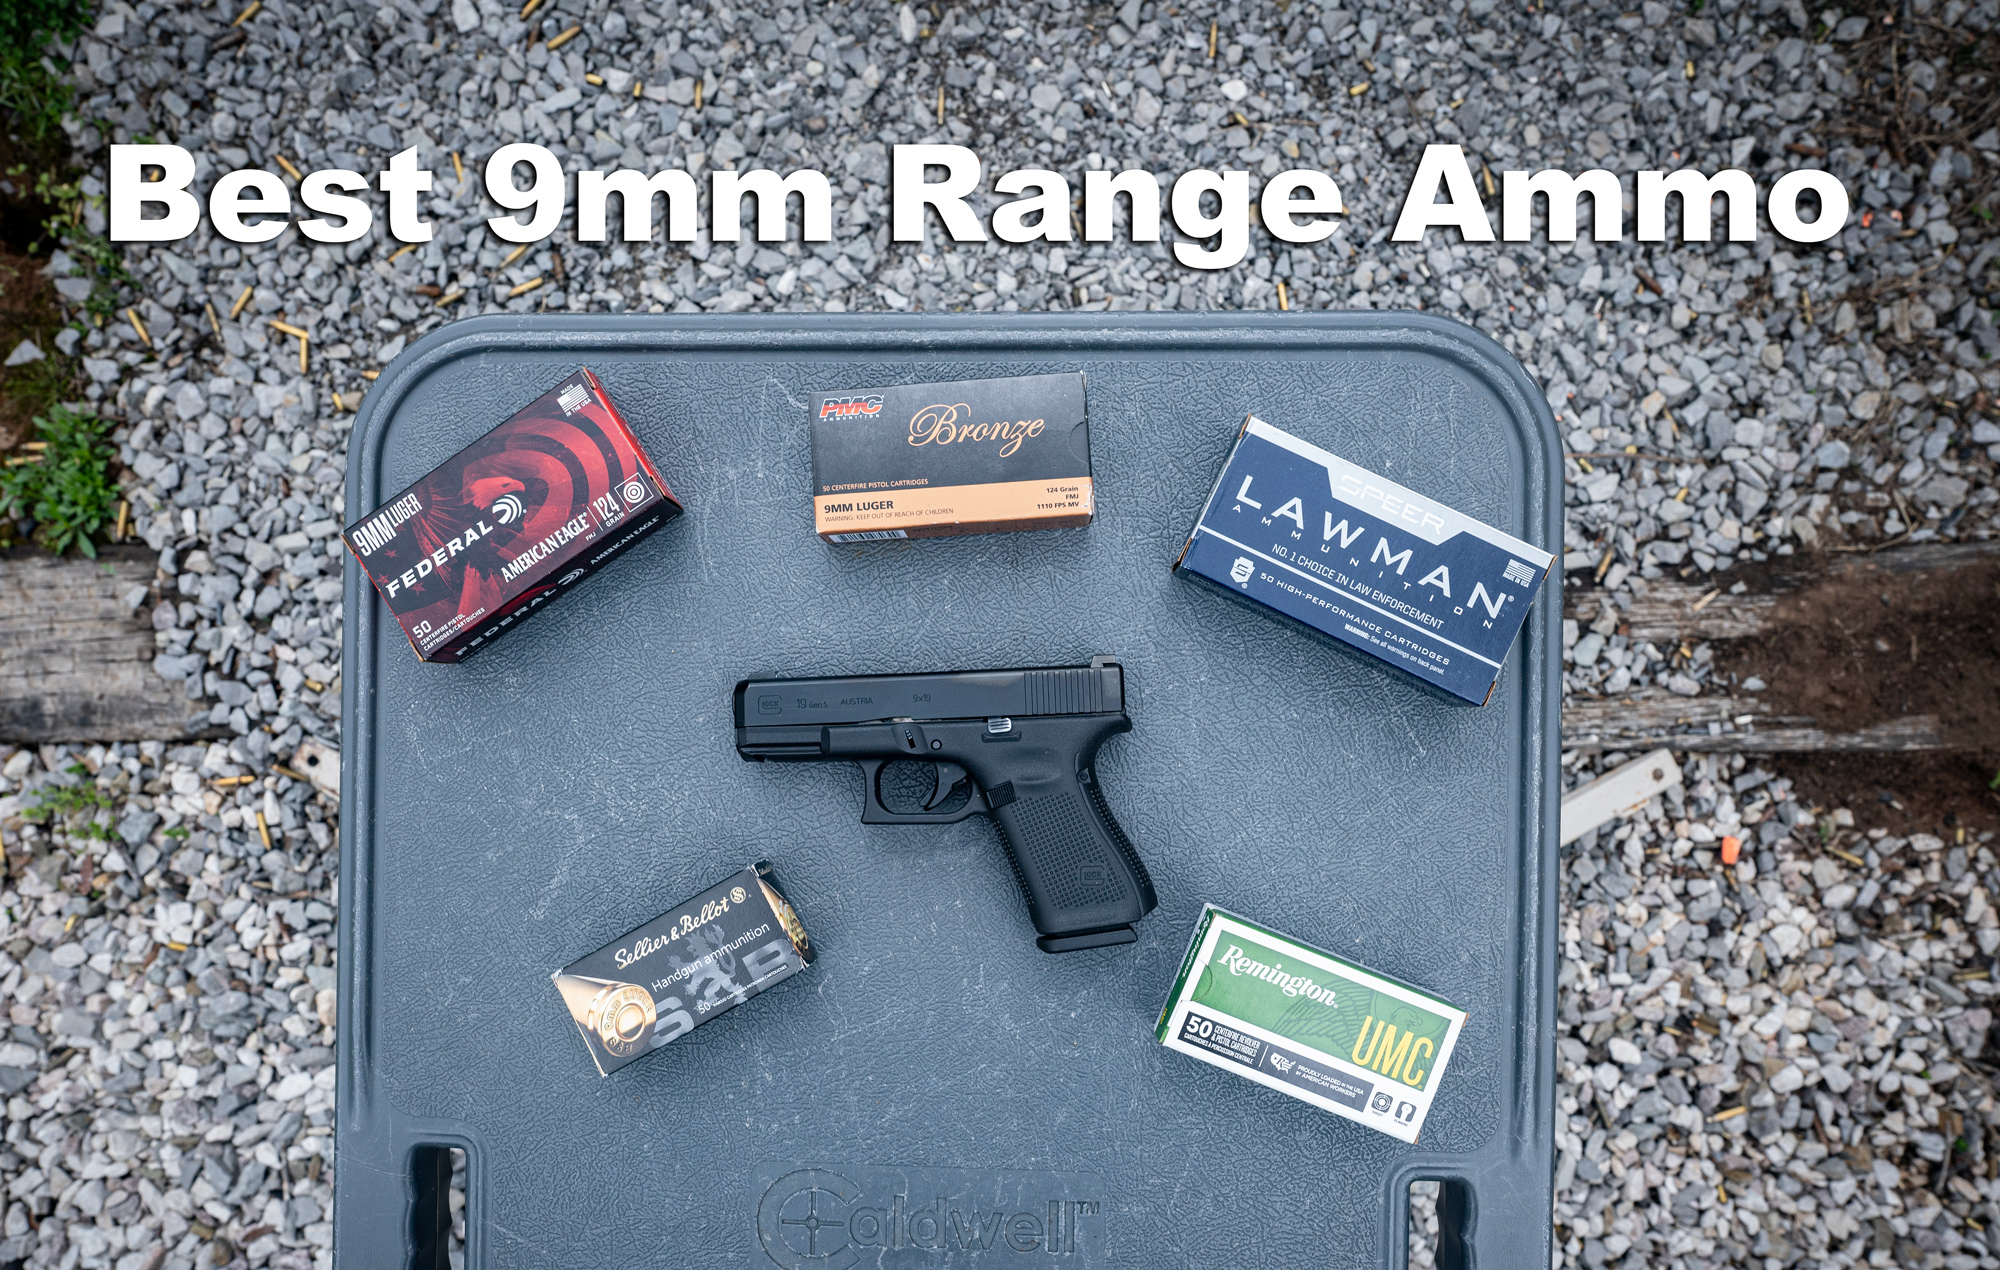 9mm ammo options at a shooting range with a pistol